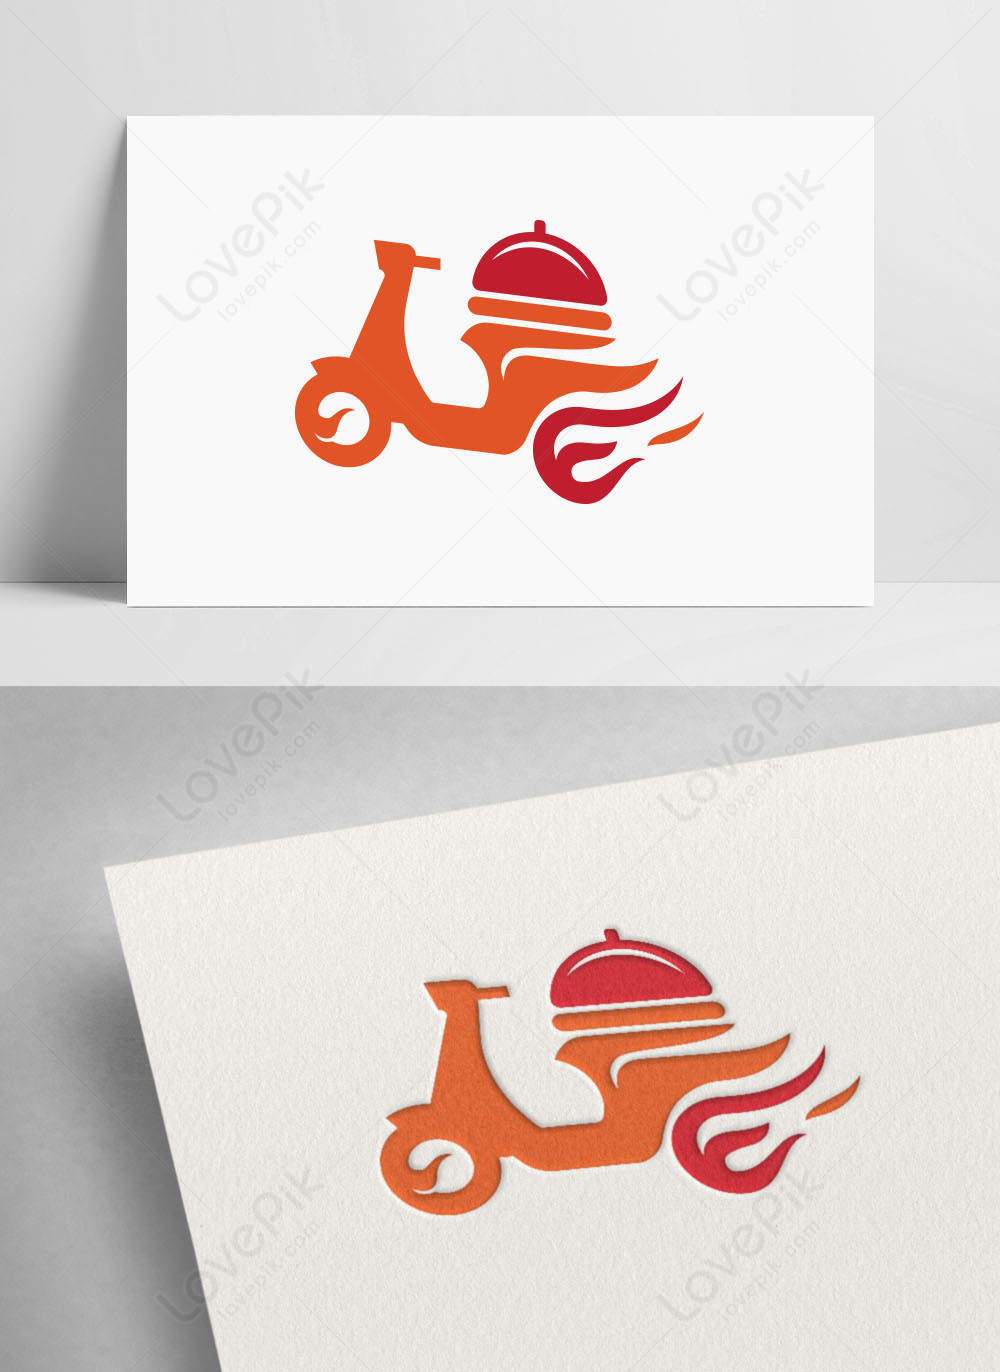 Logo Design Food Delivery With A Scooter Royalty Free SVG, Cliparts,  Vectors, and Stock Illustration. Image 151032262.